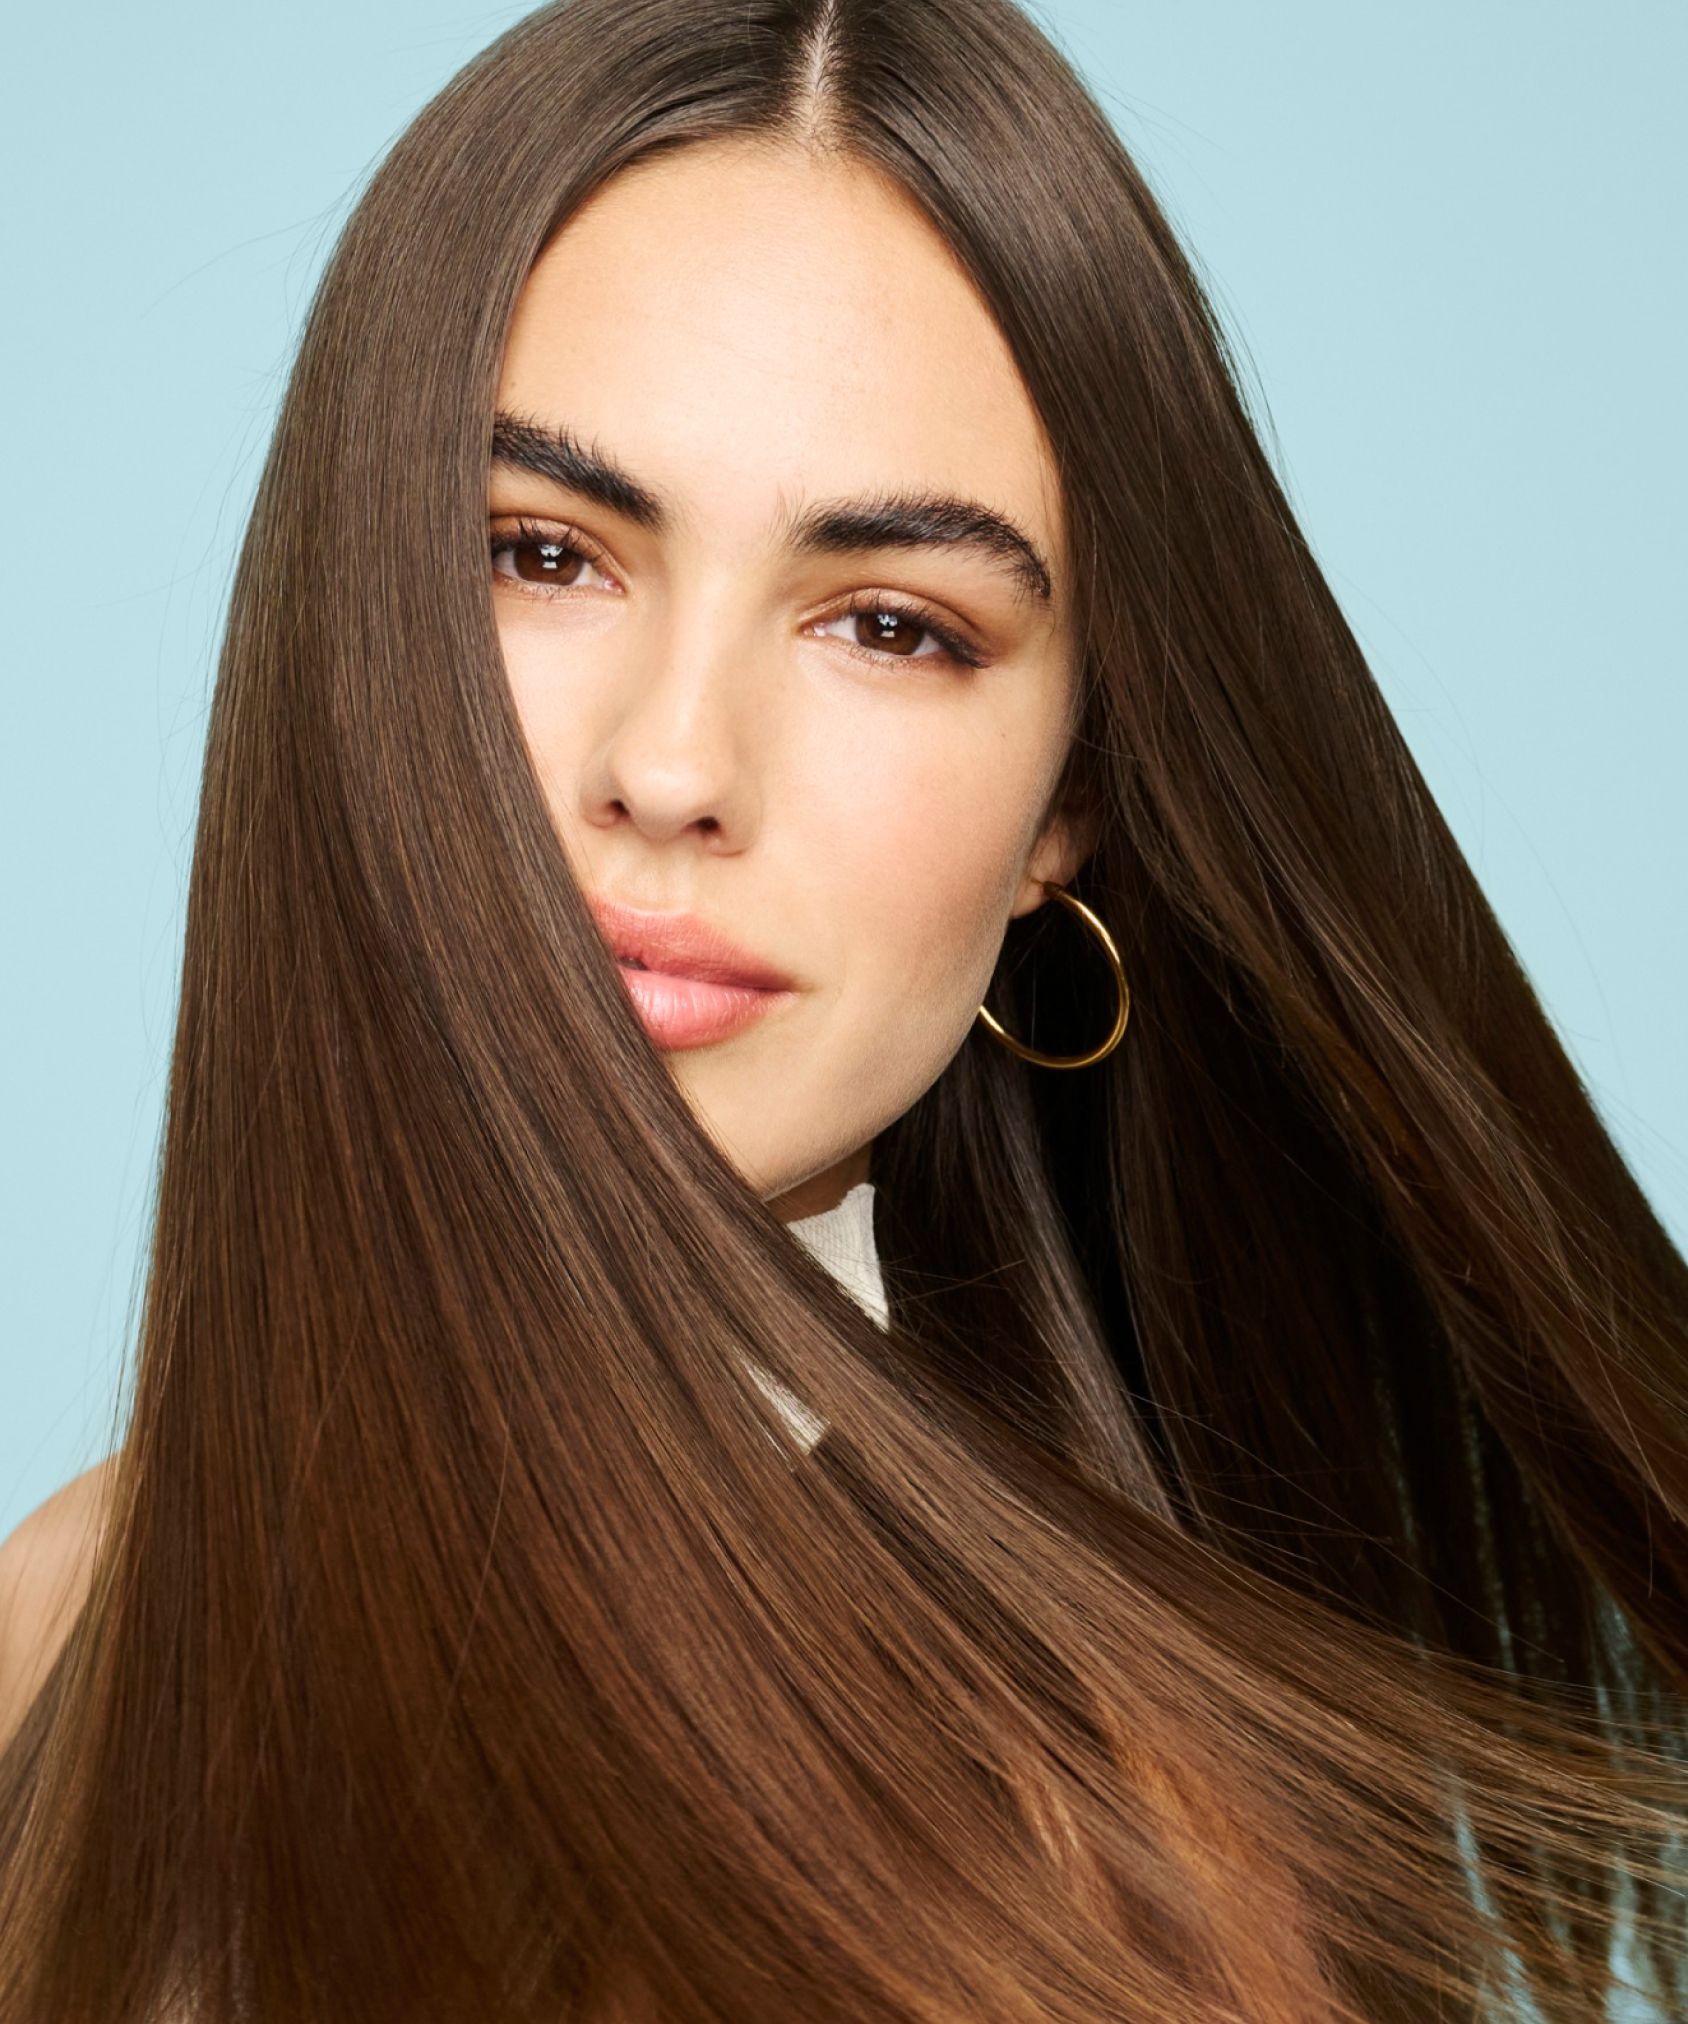 A model with healthy and shiny hair looks at the camera while her hair waves around.